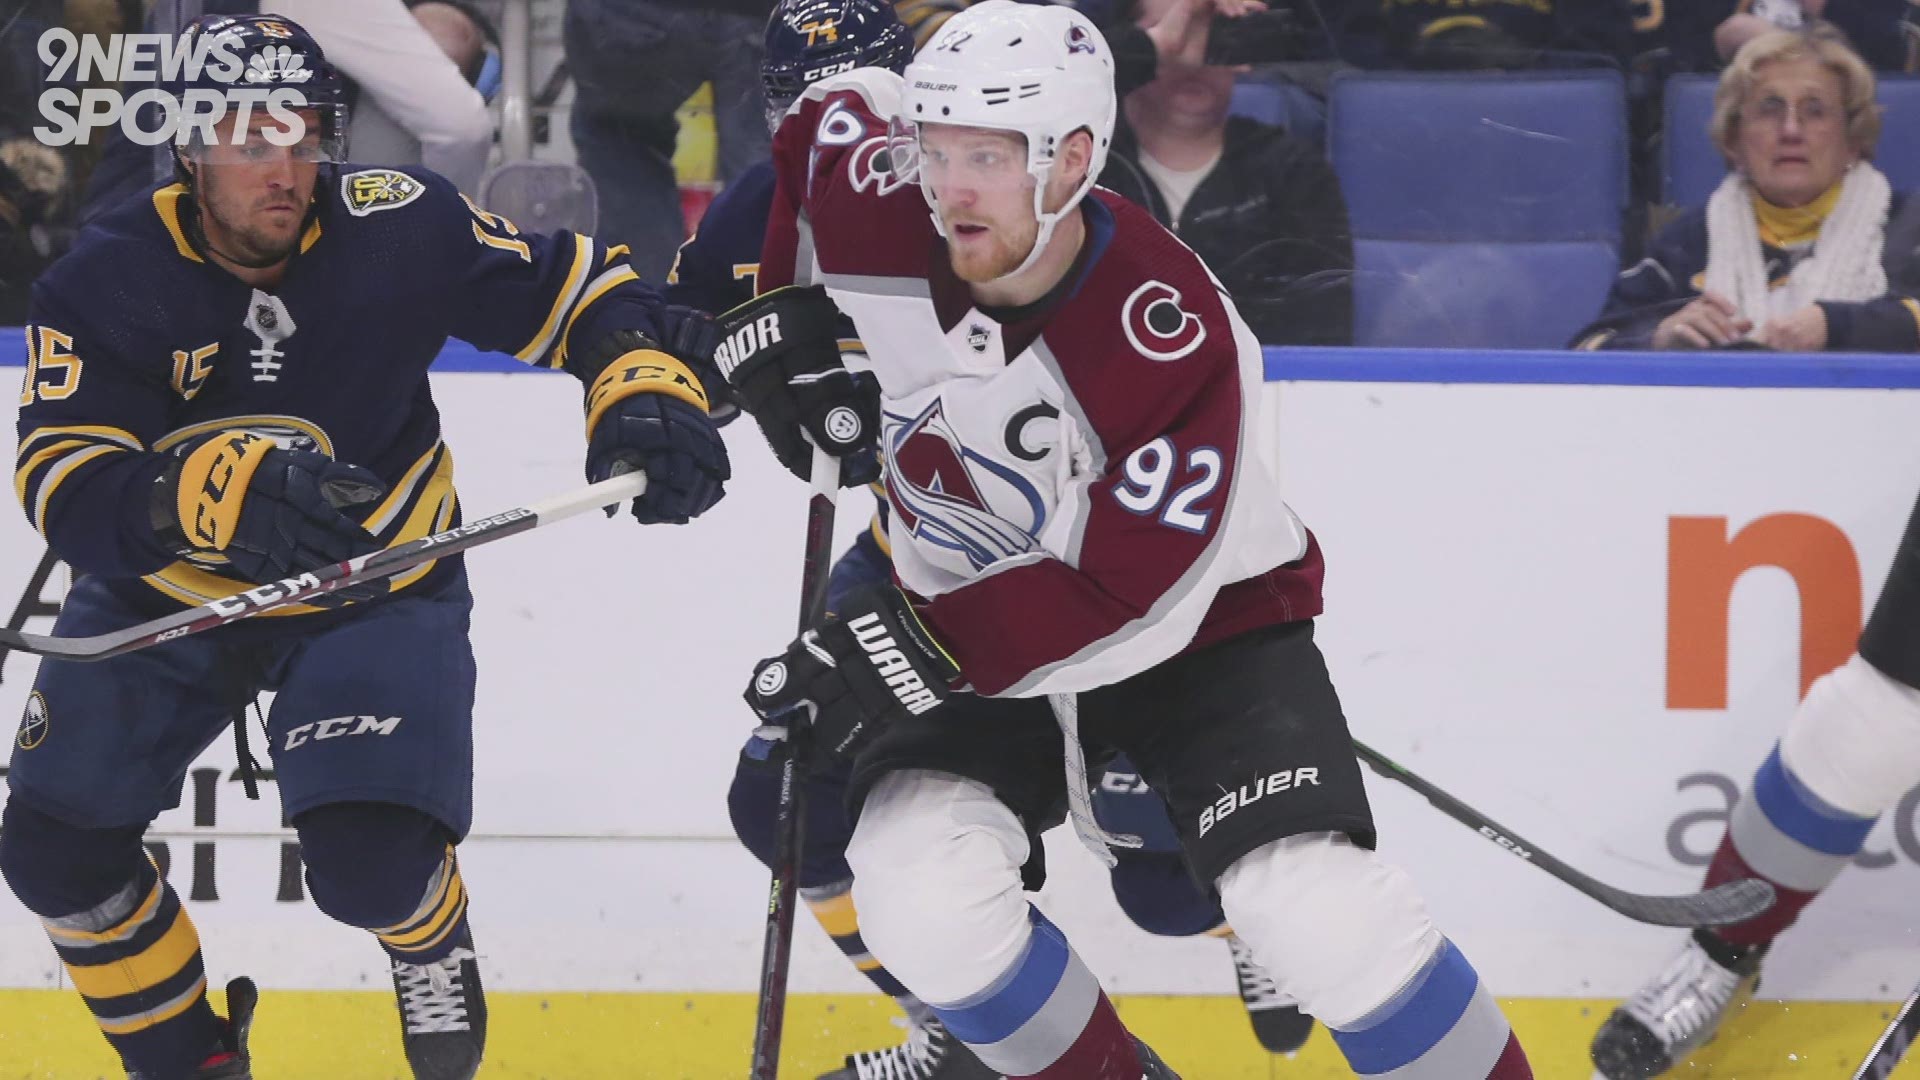 The Avalanche's captain said he will miss having fans at playoff games, but the team will find a way to stay motivated without a raucous crowd.